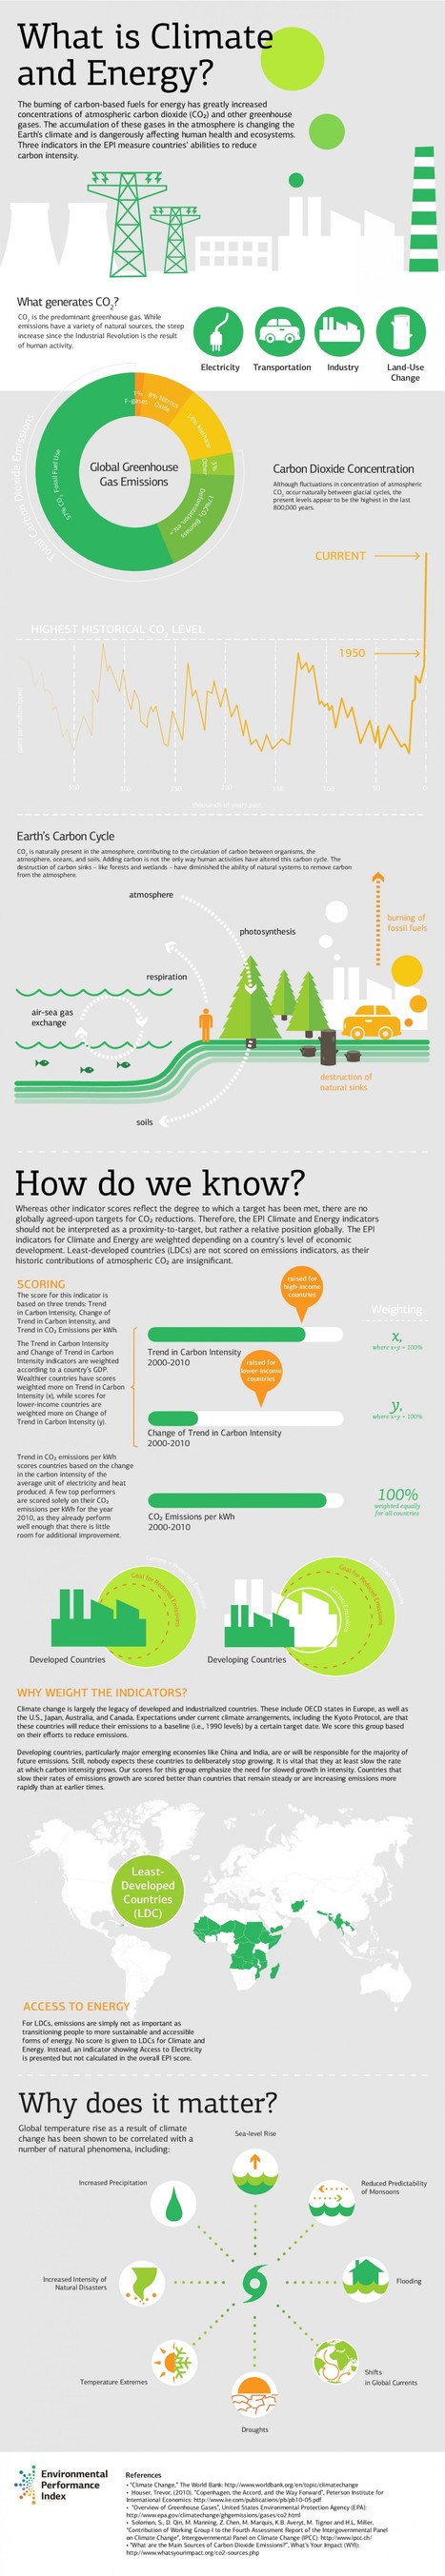 What is a Climate and Energy Indicator? | Infographic | Design, Science and Technology | Scoop.it